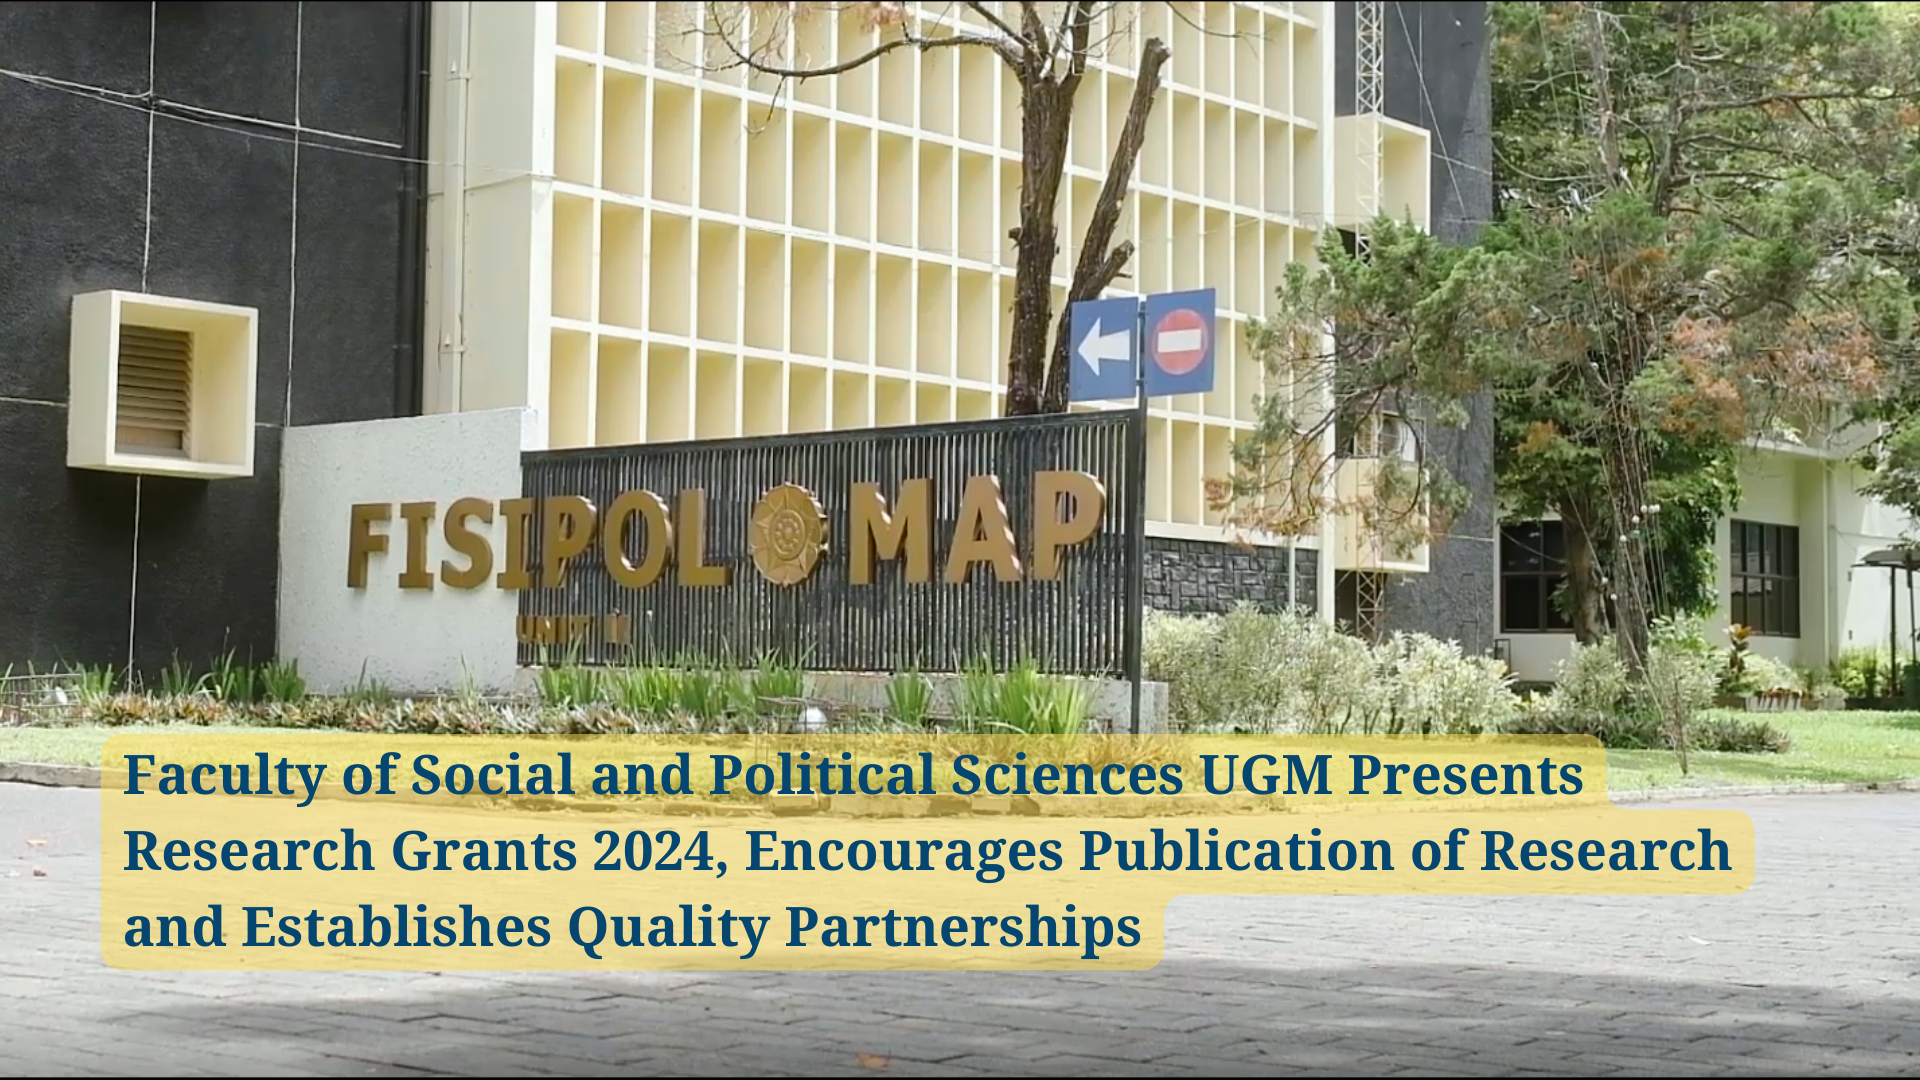 Faculty of Social and Political Sciences UGM Presents Research Grants 2024, Encourages Publication of Research and Establishes Quality Partnerships